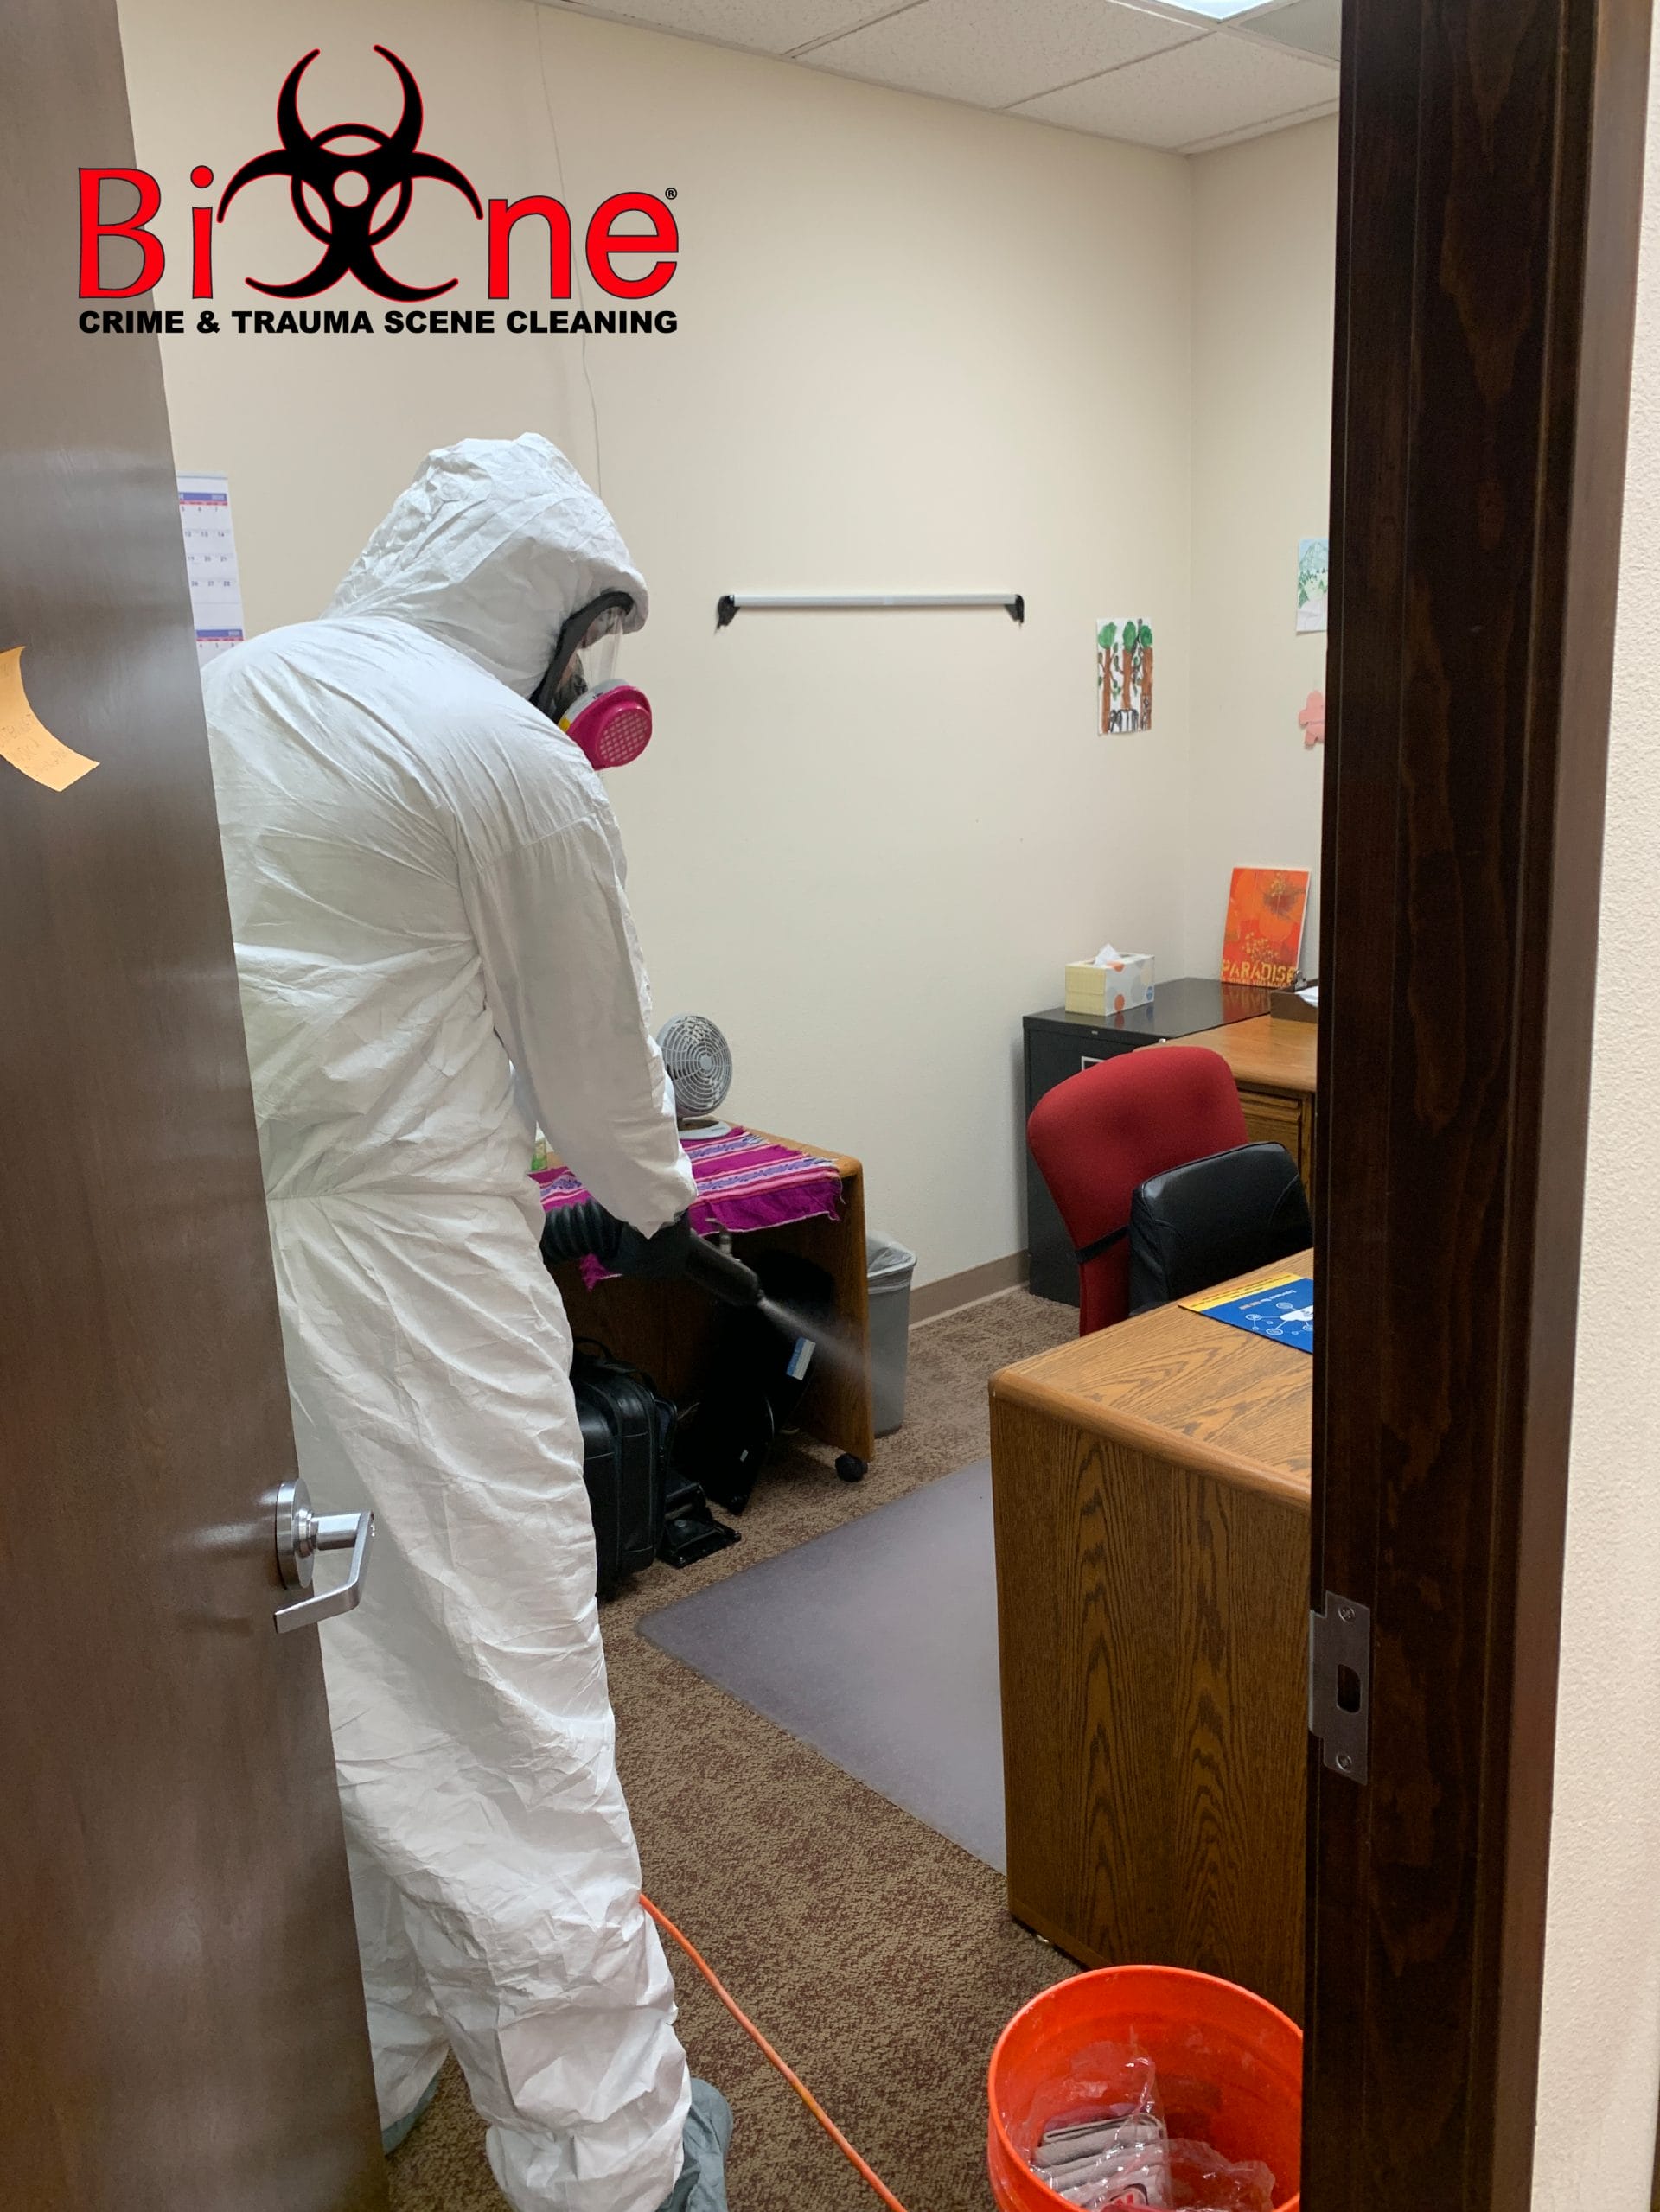 Bio-One of Orange works for residential and commercial properties to thoroughly clean and disinfect areas that may have been contaminated with the COVID-19 virus.